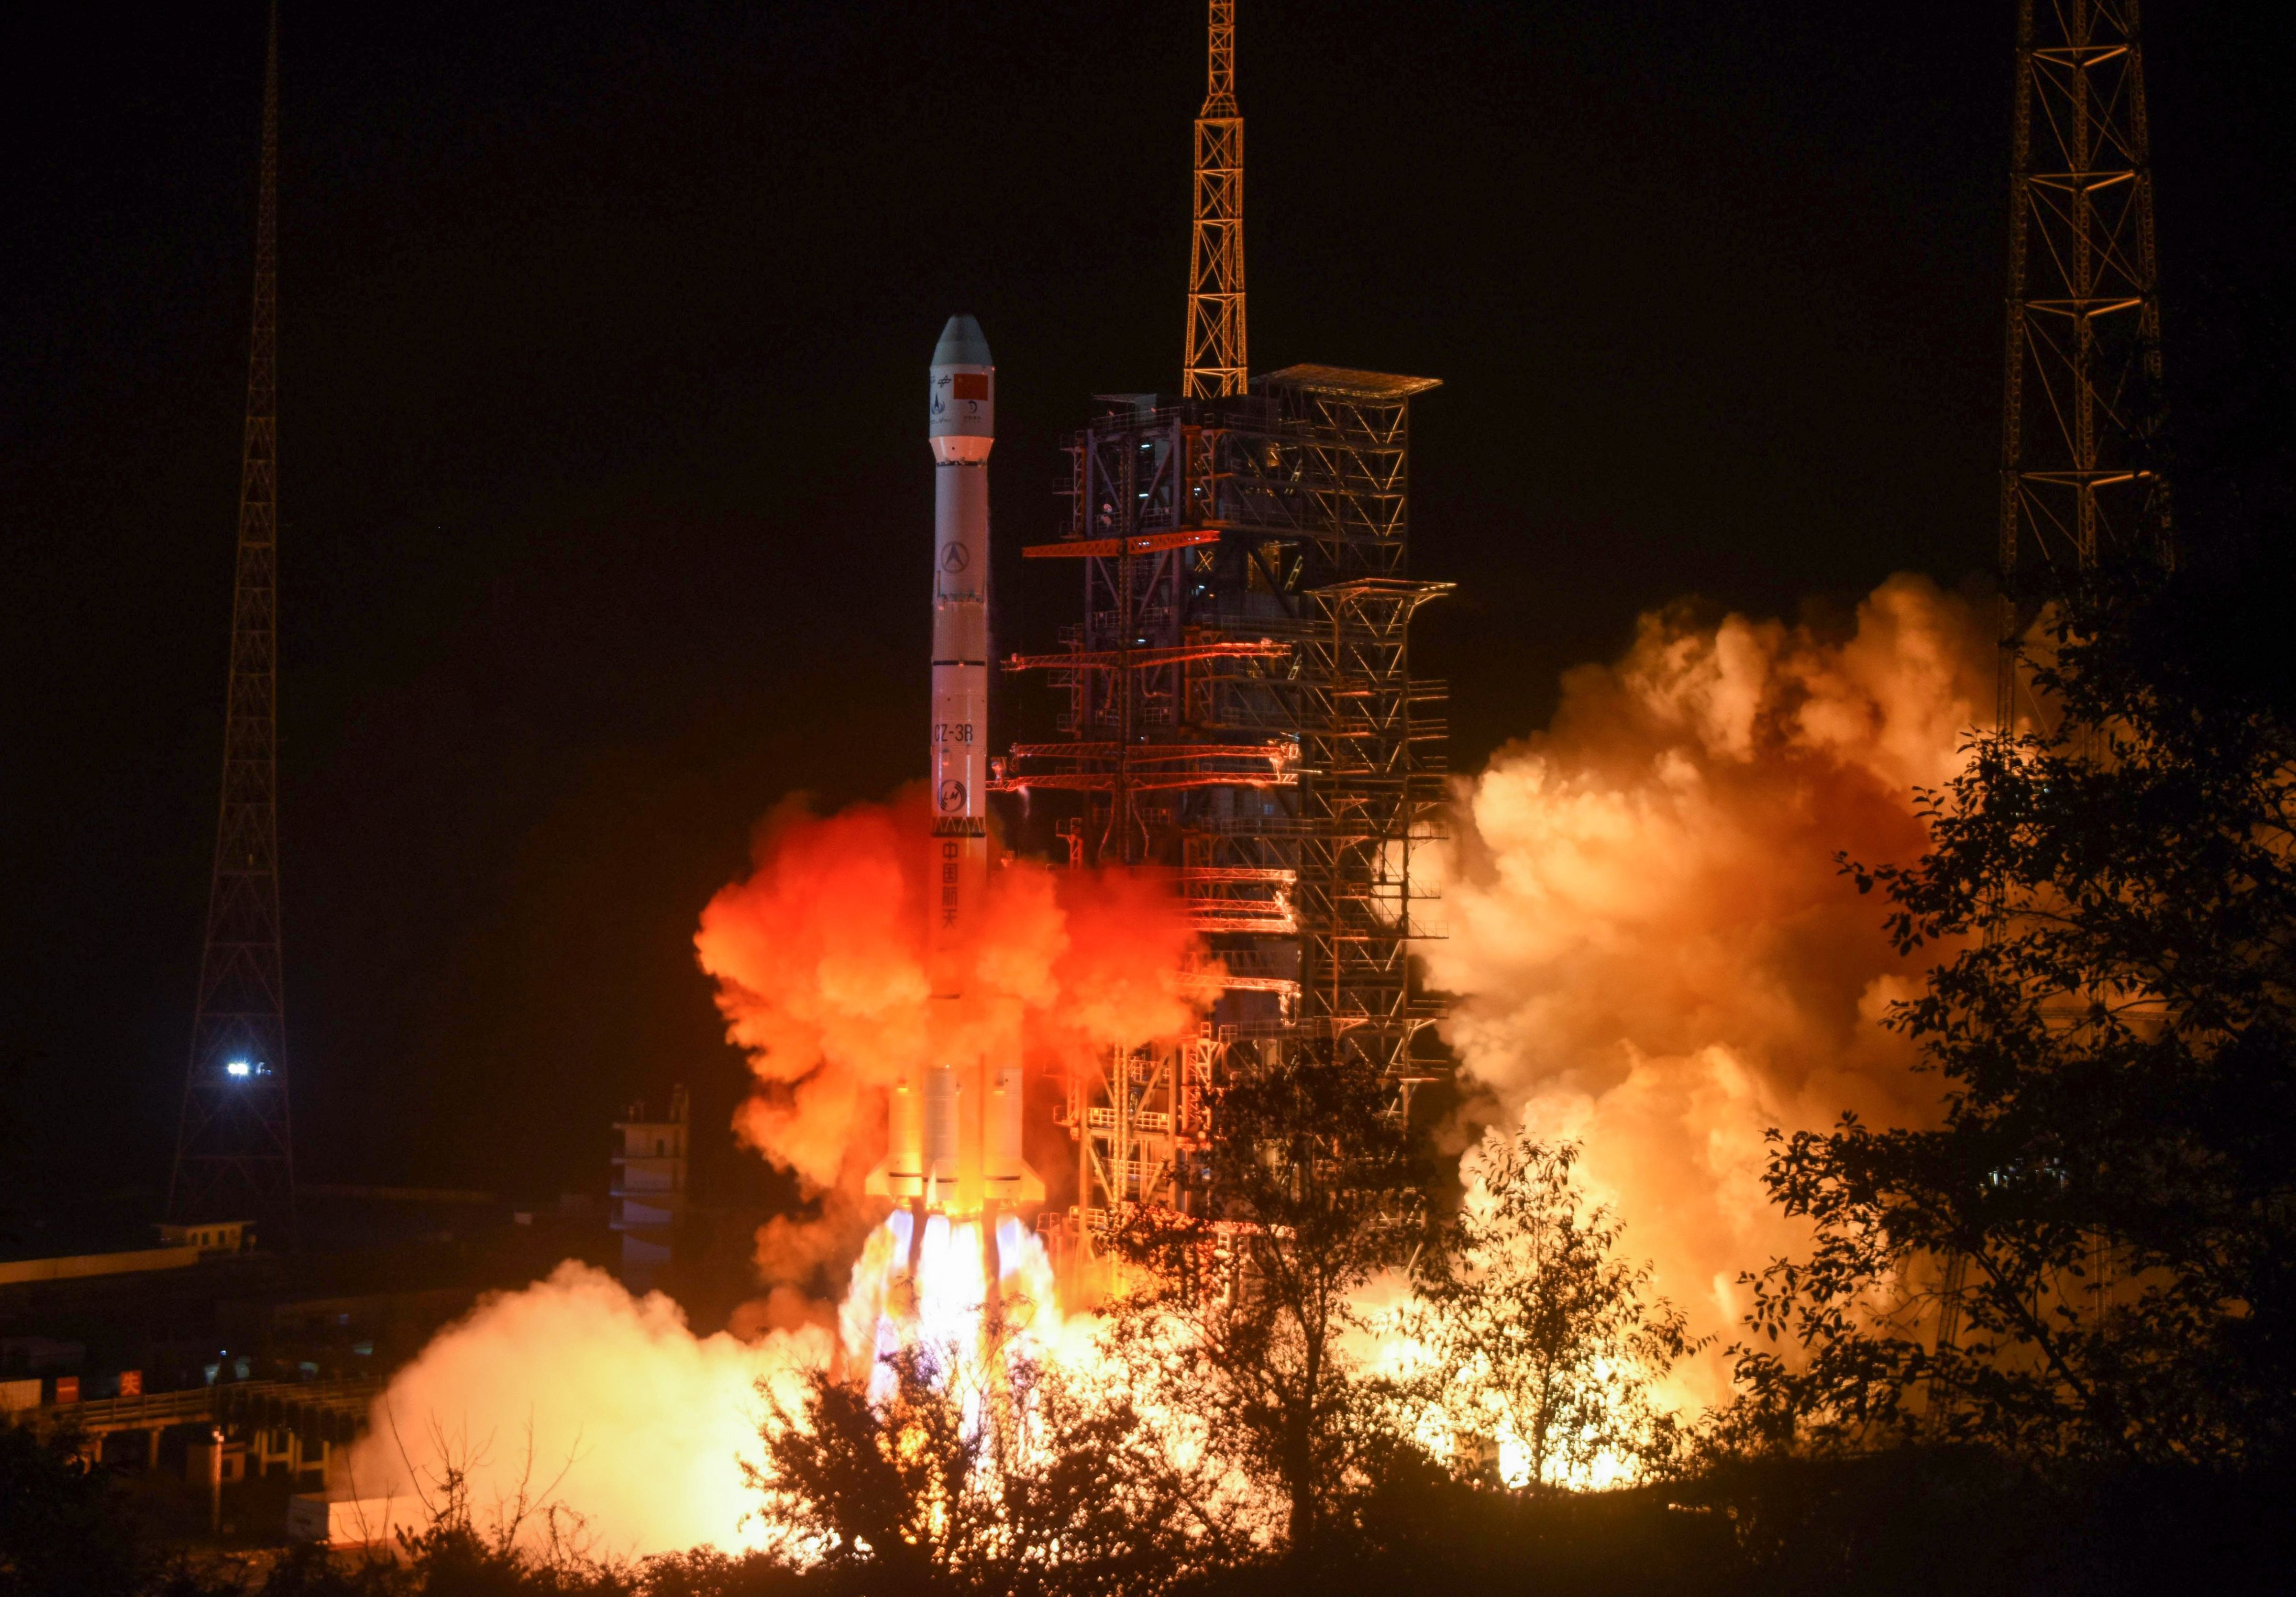 A Long March 3B rocket lifts off from the Xichang launch center in China's southwestern Sichuan province on Dec. 8, 2018. (Stringer—AFP/Getty Images)